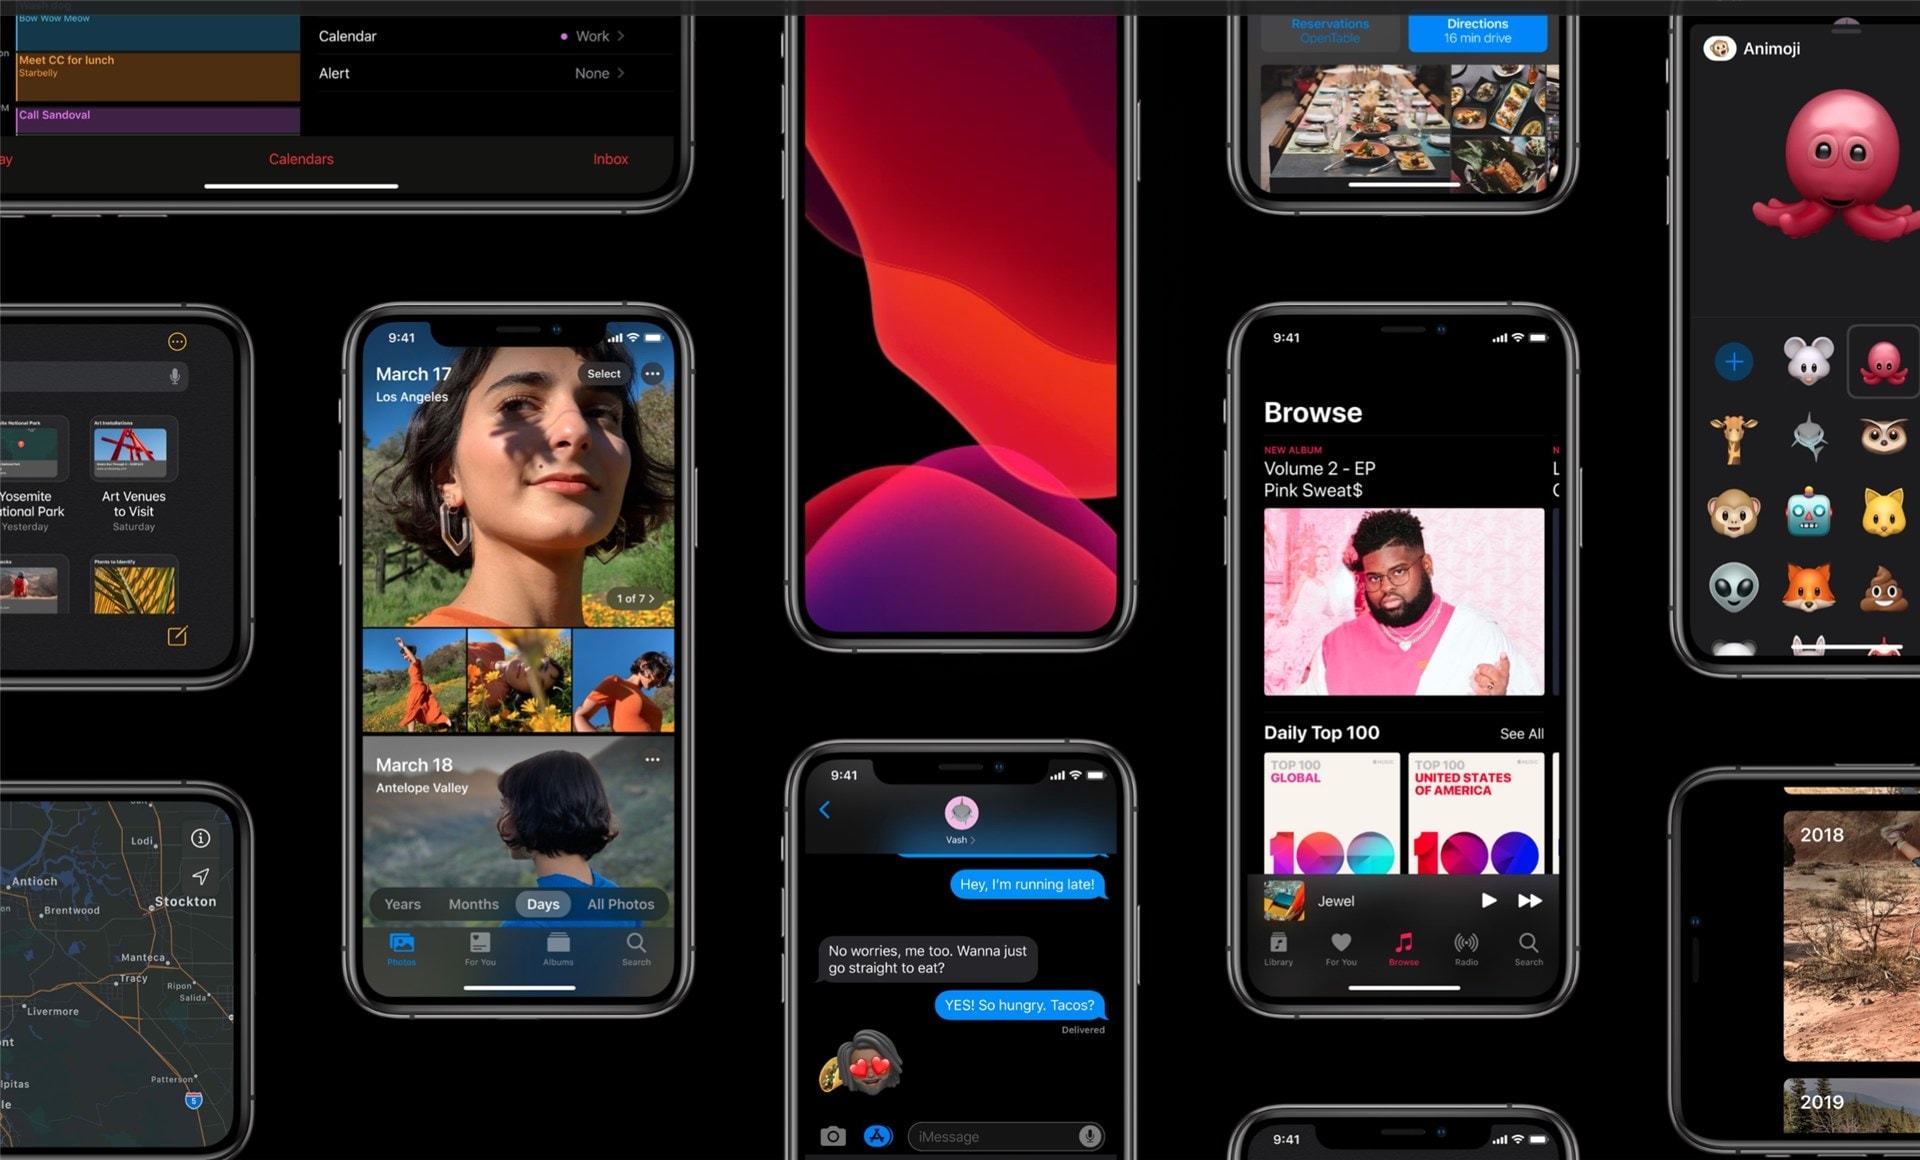 Apple iOS 13 is both disappointing and exciting to different groups of people